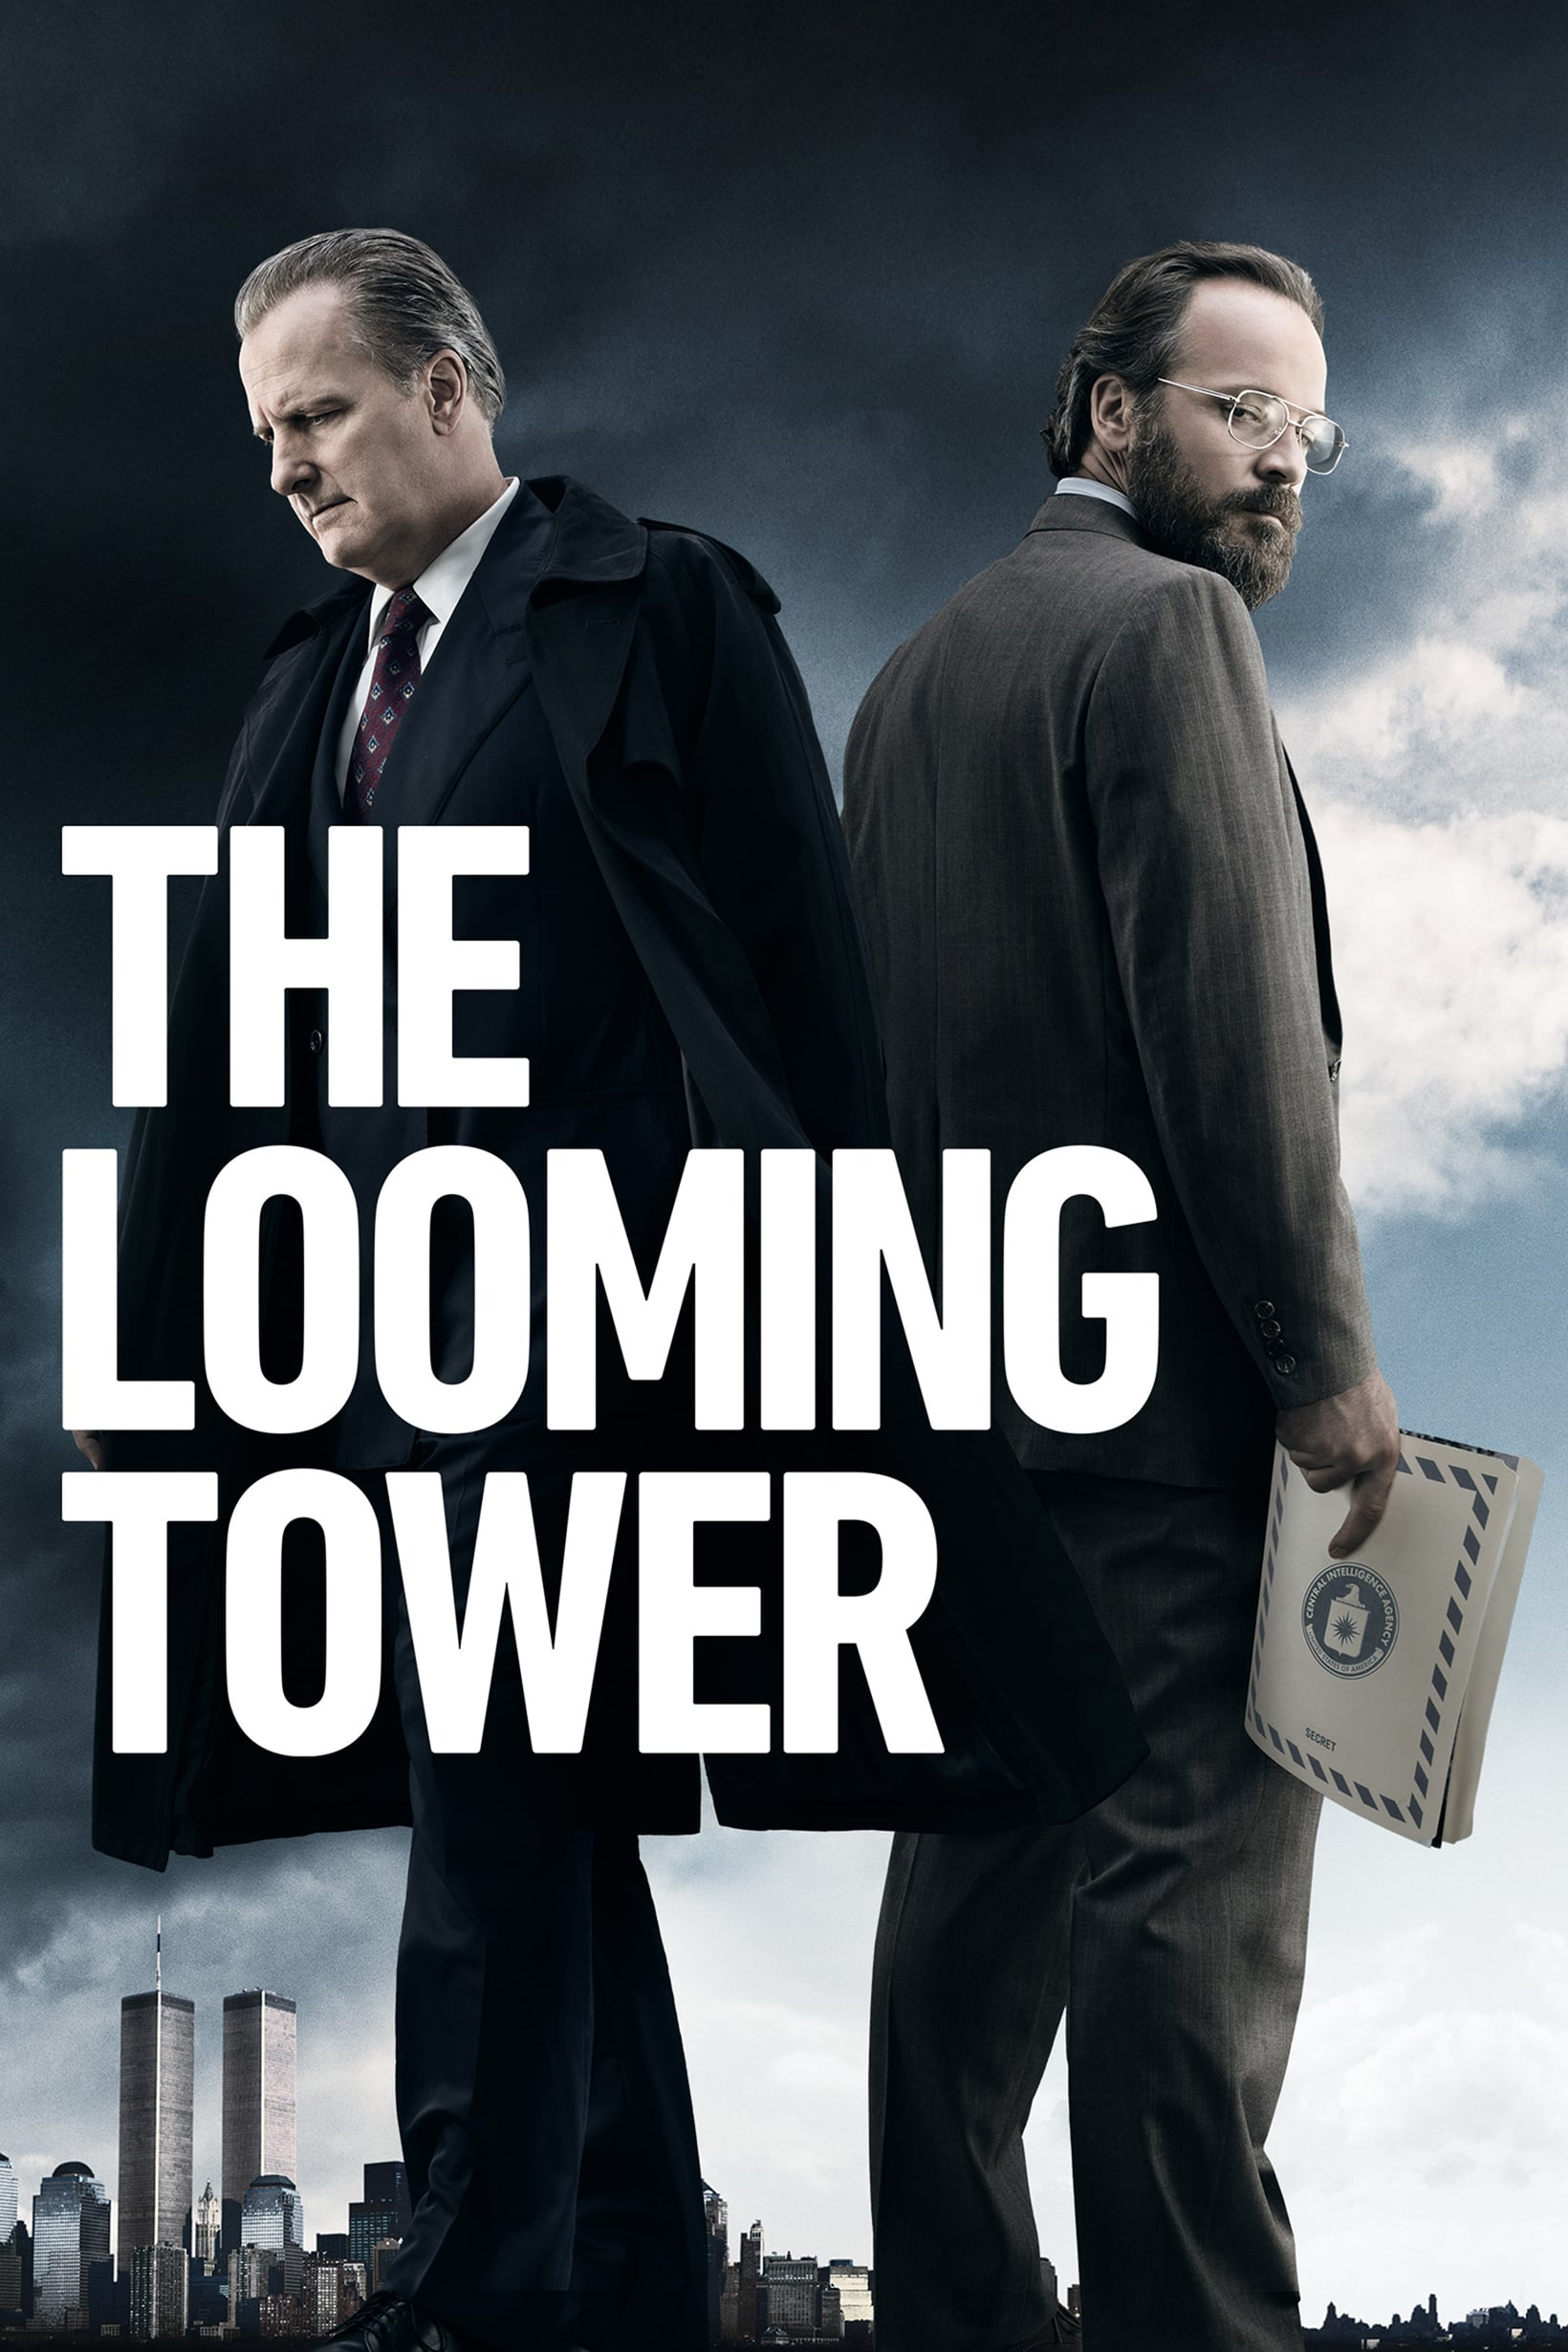 The Looming Tower rating